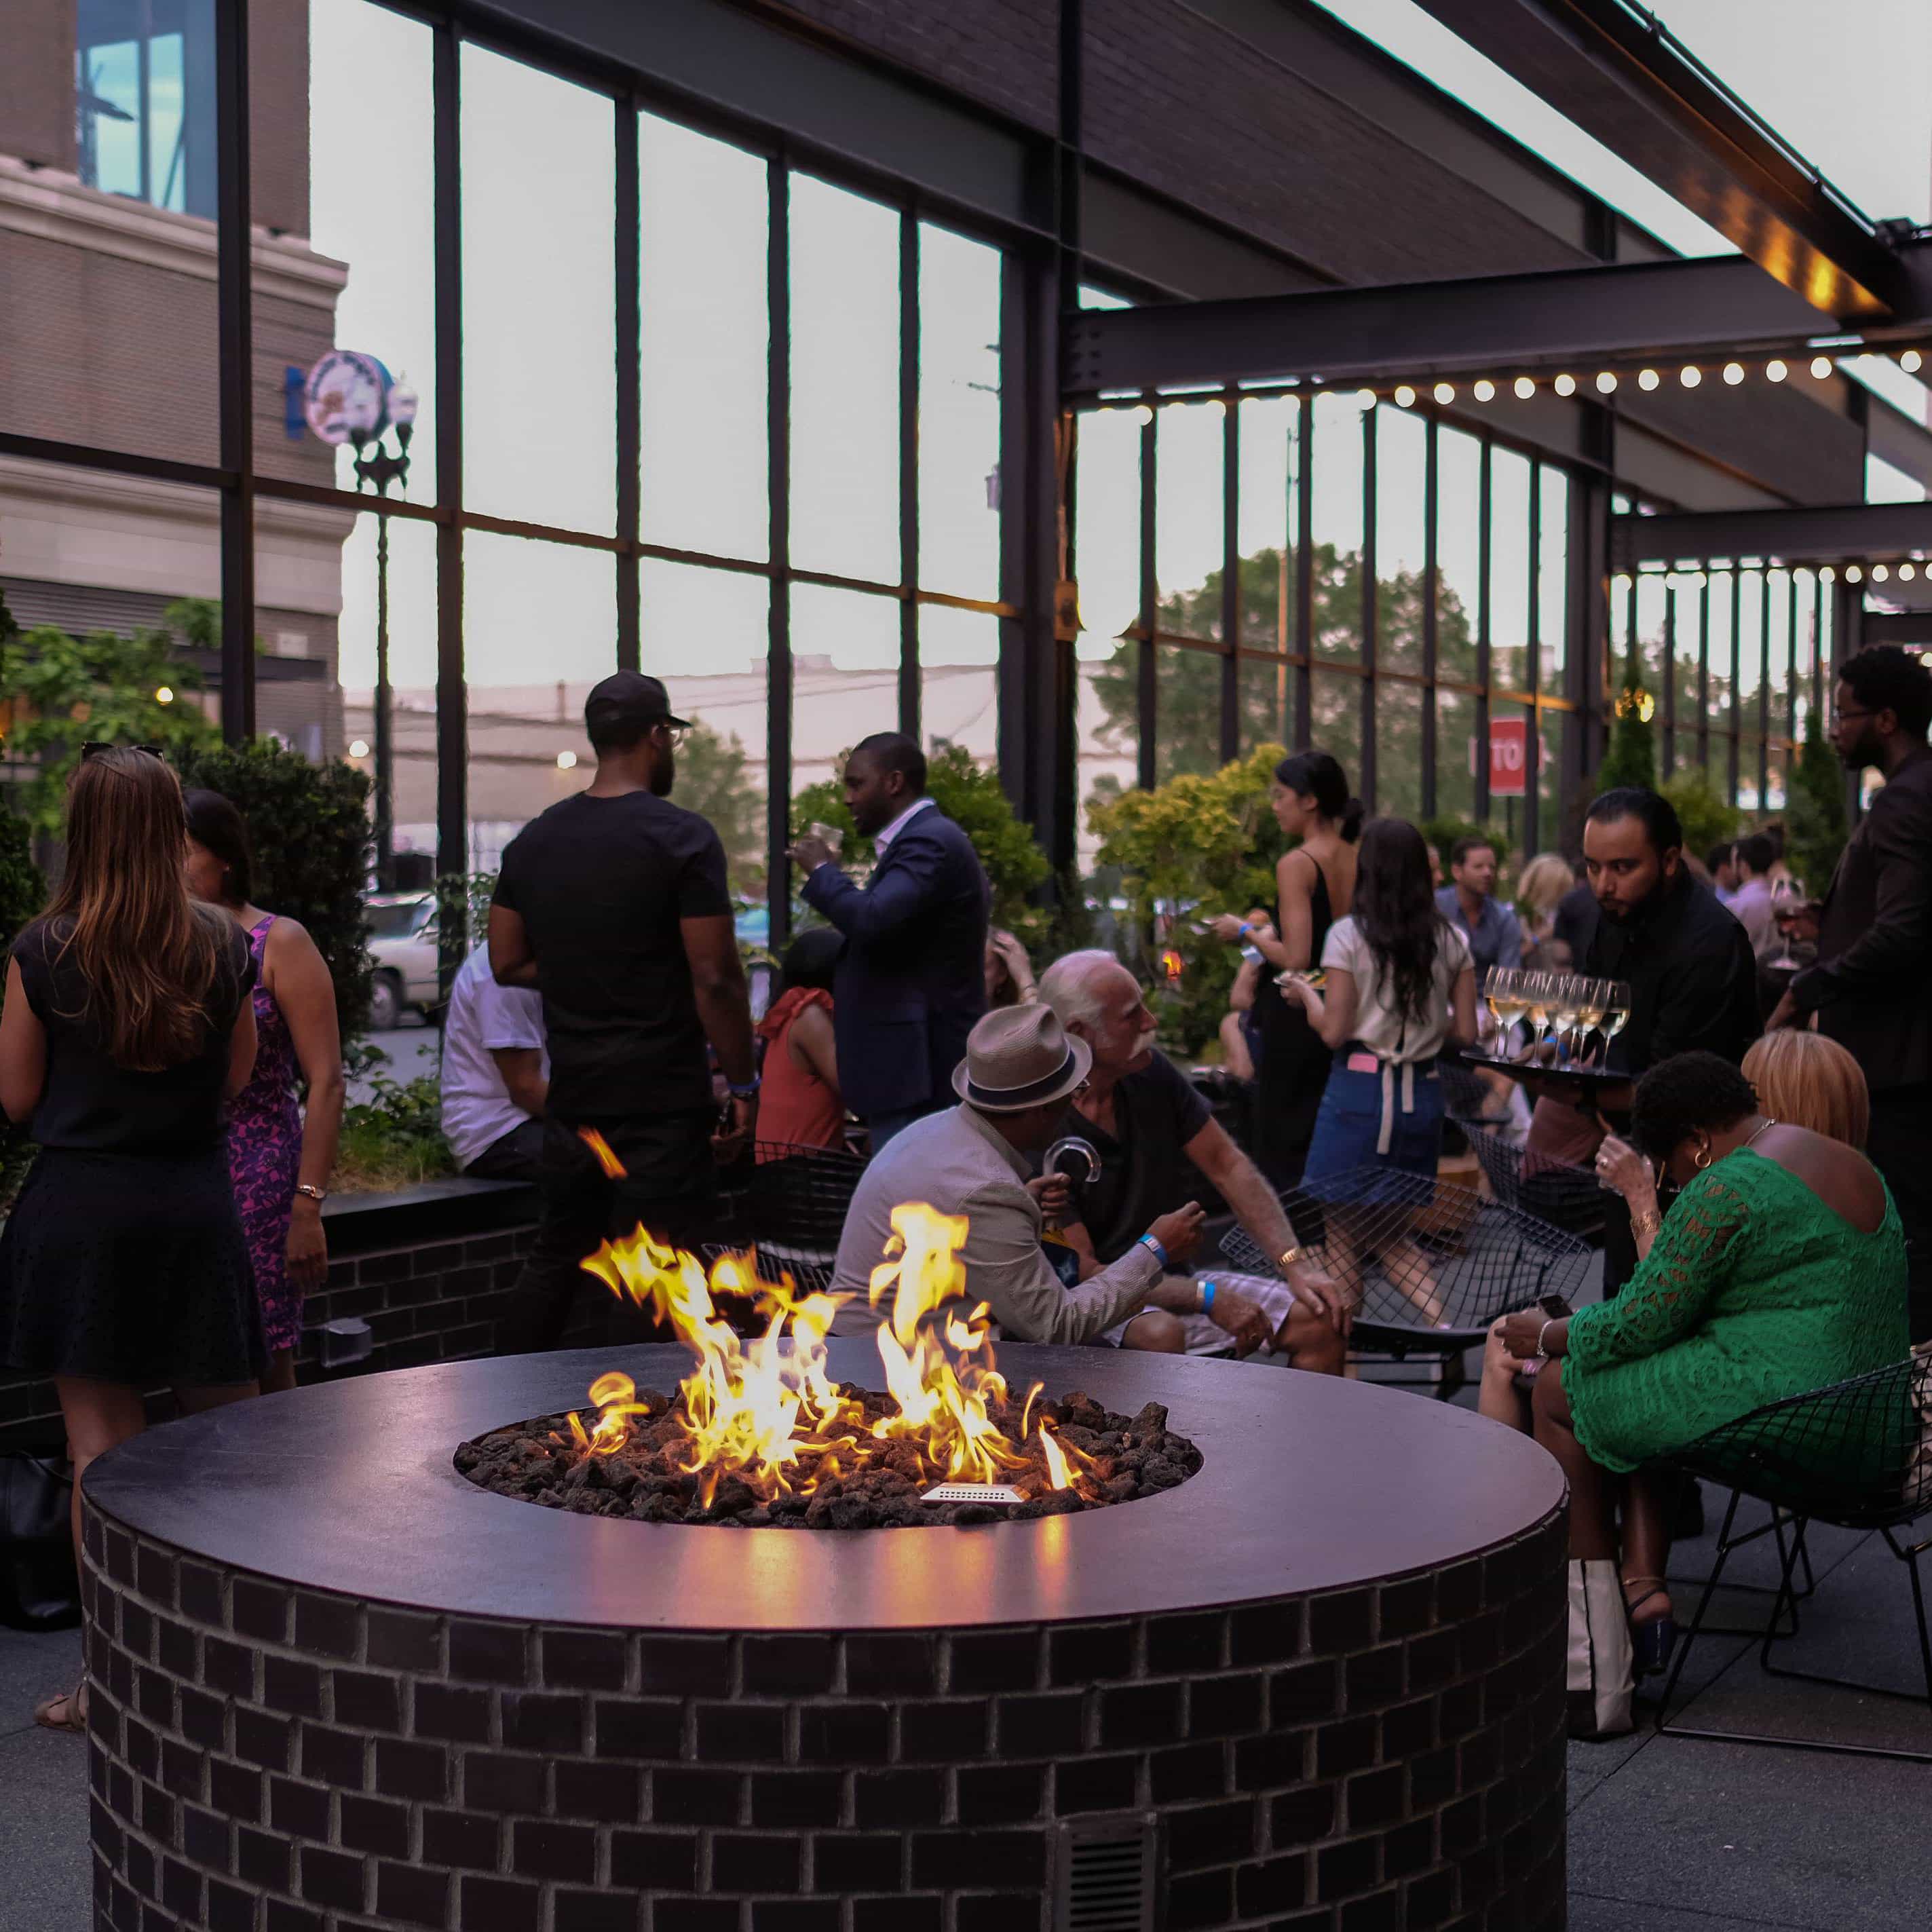 Outdoor firepit with people gathered in a Chicago neighborhood